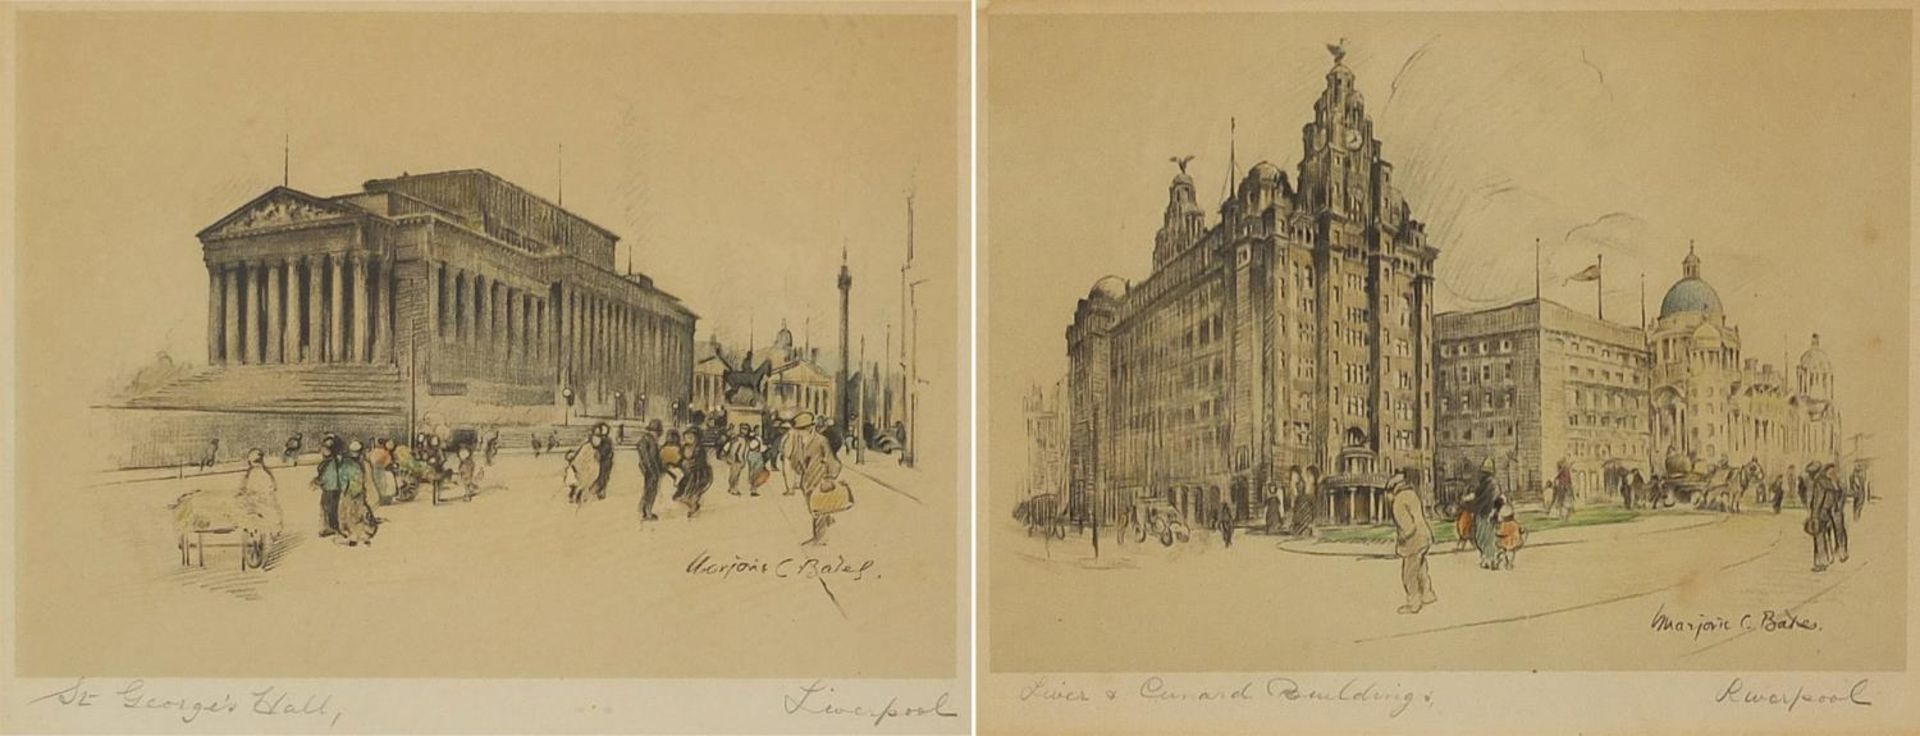 After Marjorie Christine Bates - St George's Hall, Liverpool and Cunard Buildings, pair of pencil